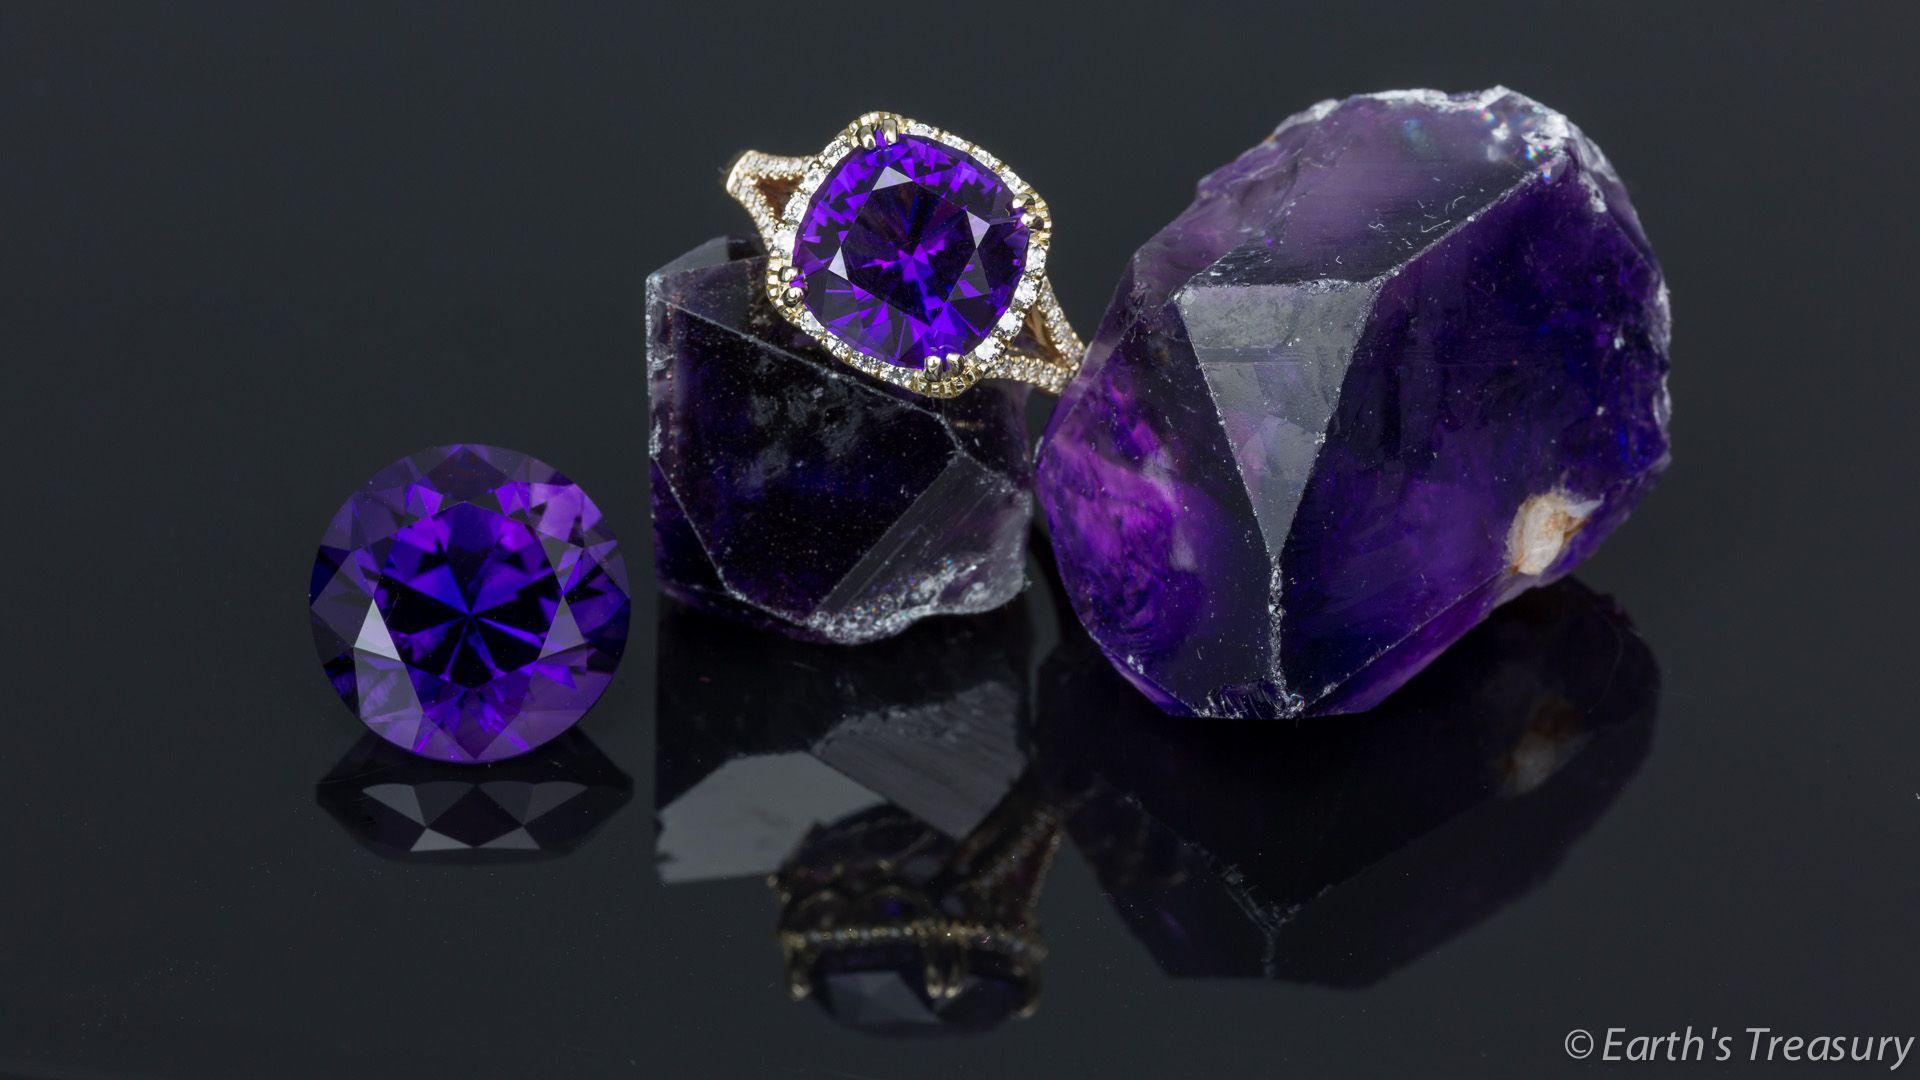 Photographing Gems and Jewelry